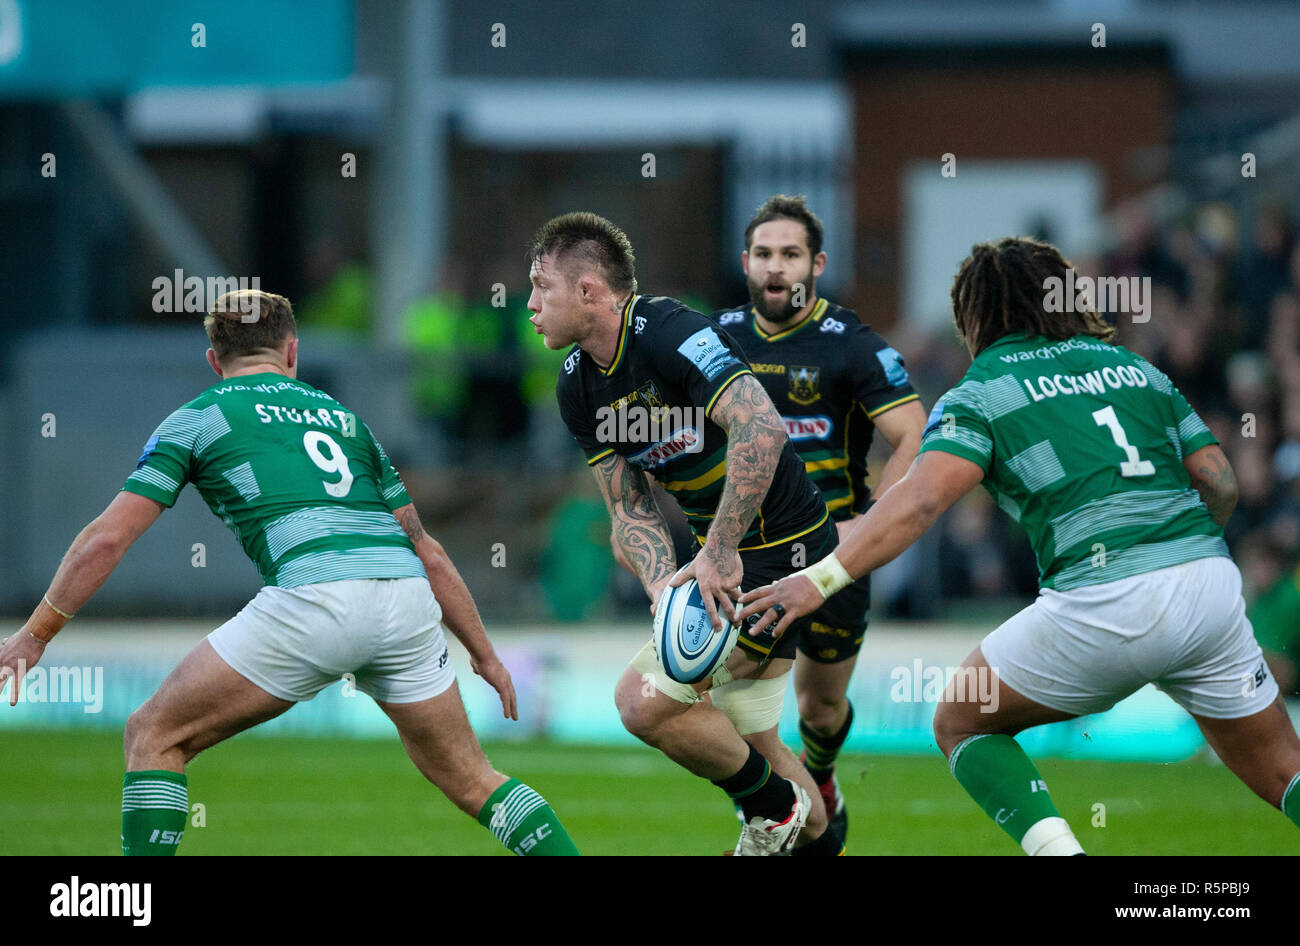 Northampton, UK. 1st December 2018. Teimana Harrison of Northampton Saints runs with the ball during the Gallagher Premiership Rugby match between Northampton Saints and Newcastle Falcons. Andrew Taylor/Alamy Live News Stock Photo